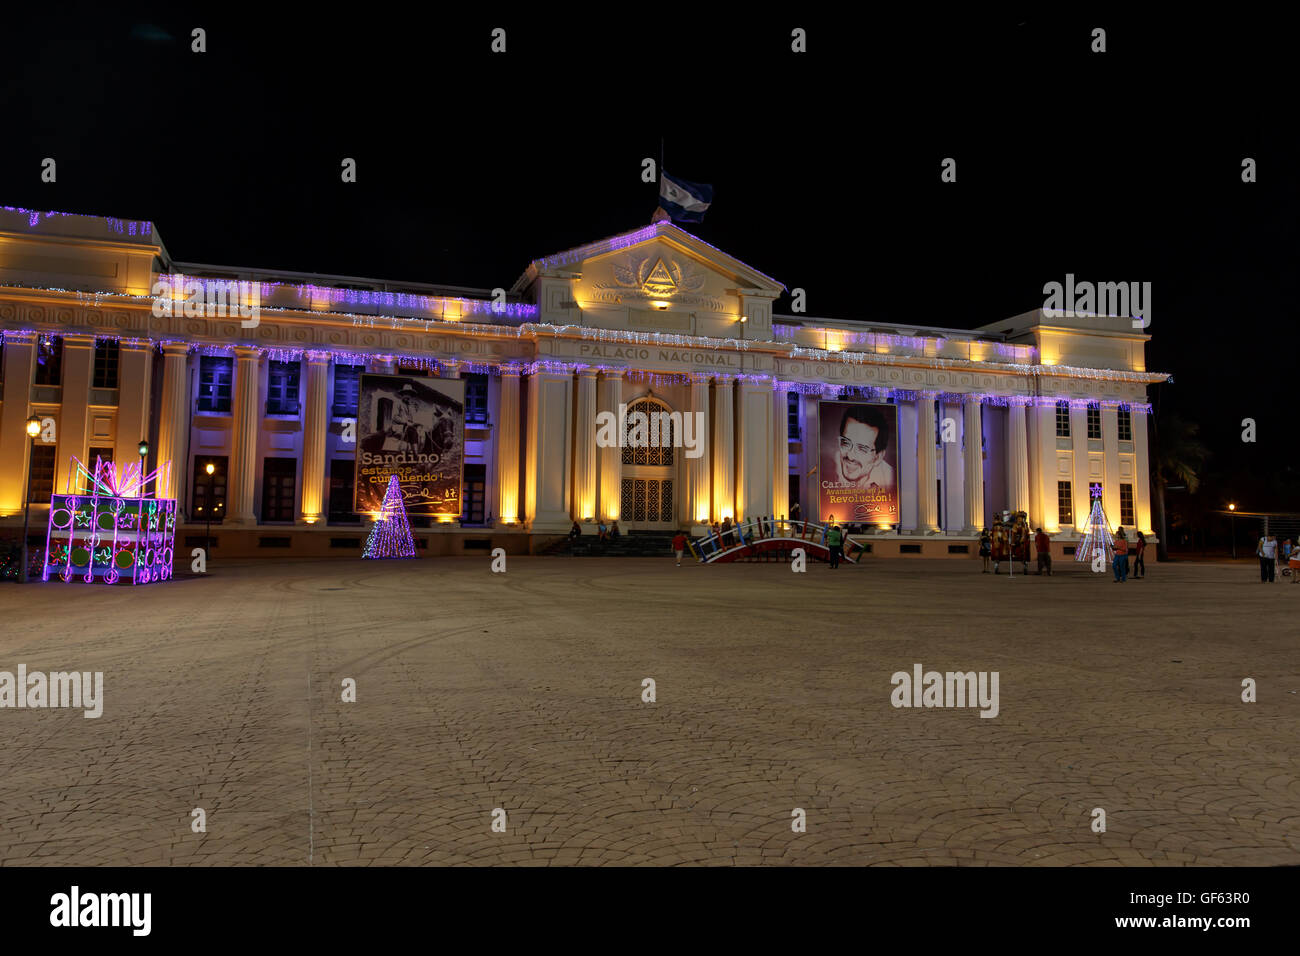 Managua, Nicaragua - December 22, 2015: National Palace View at night with christmas lights Stock Photo